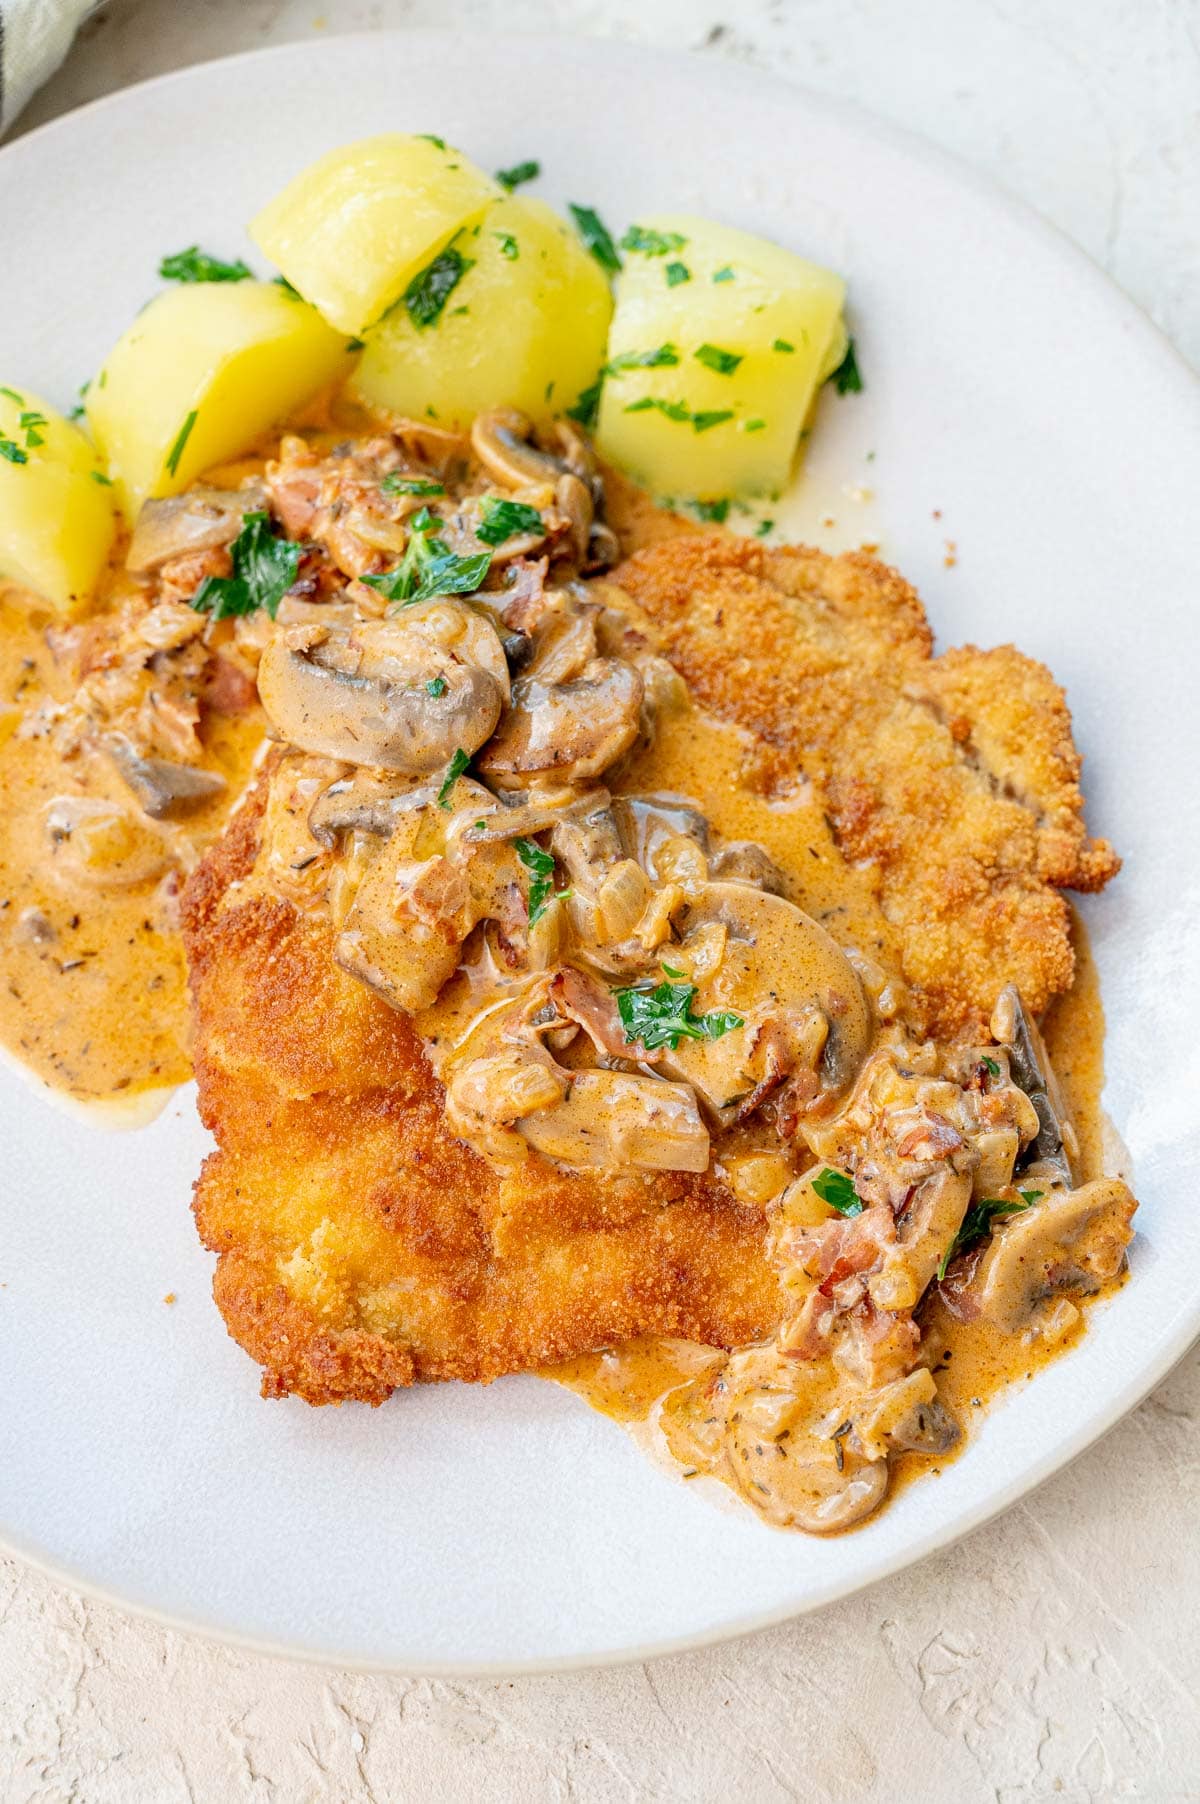 Jägerschnitzel with mushroom sauce served with potatoes on a beige plate.